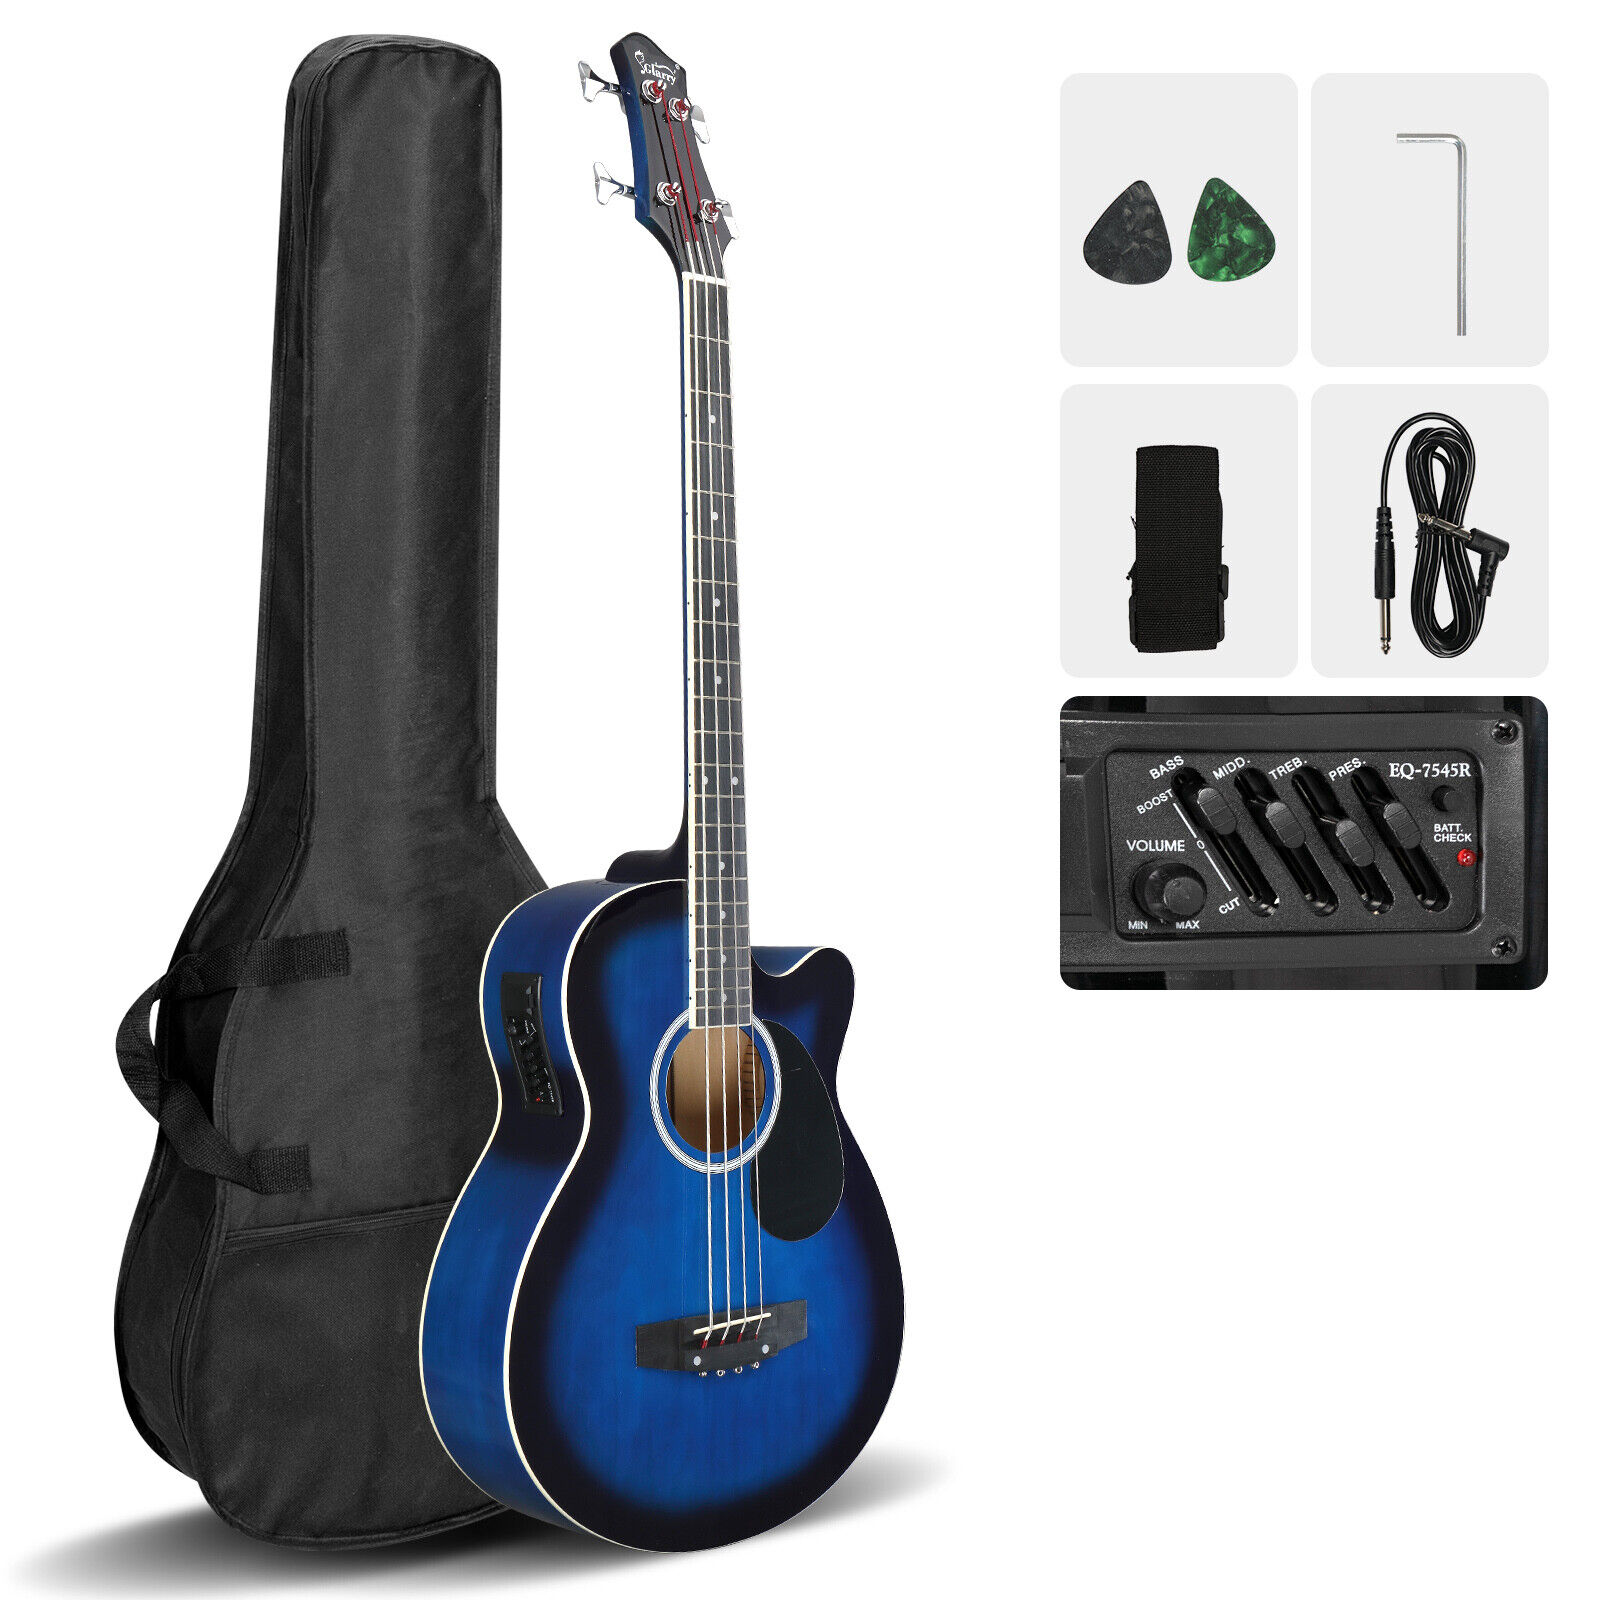 Glarry GMB101 4 string Electric Acoustic Bass Guitar 4-Band Equalizer EQ-7545R – Blue 26